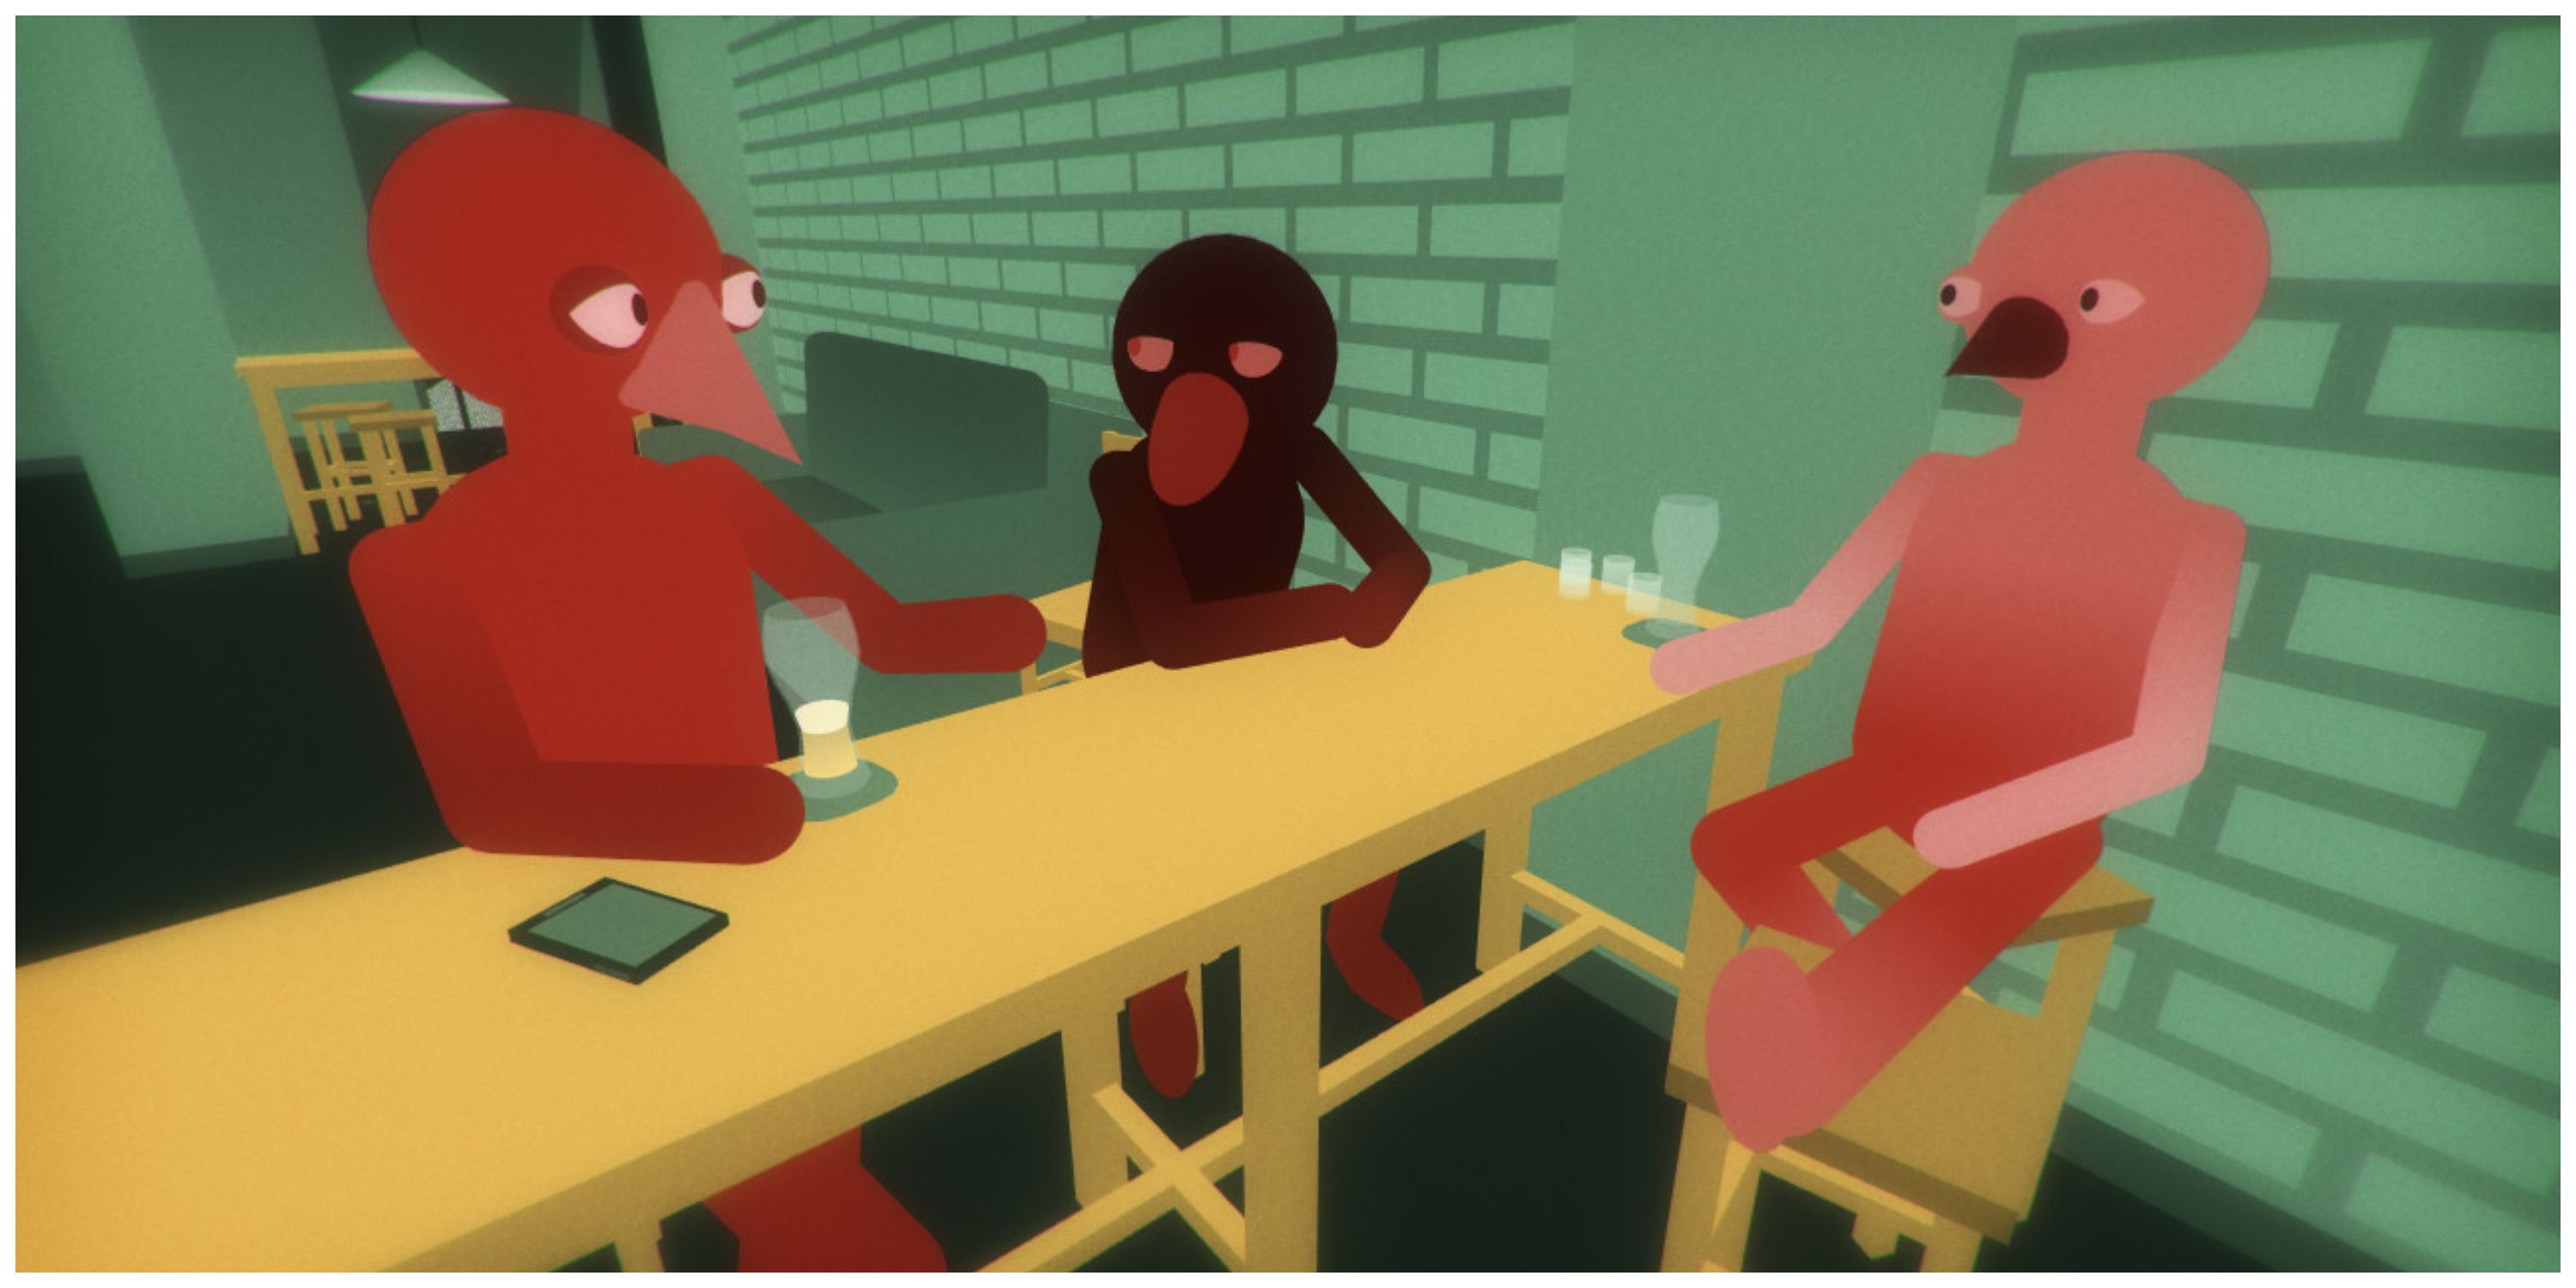 Through The Fragmentation - Three Characters Sat At A Table